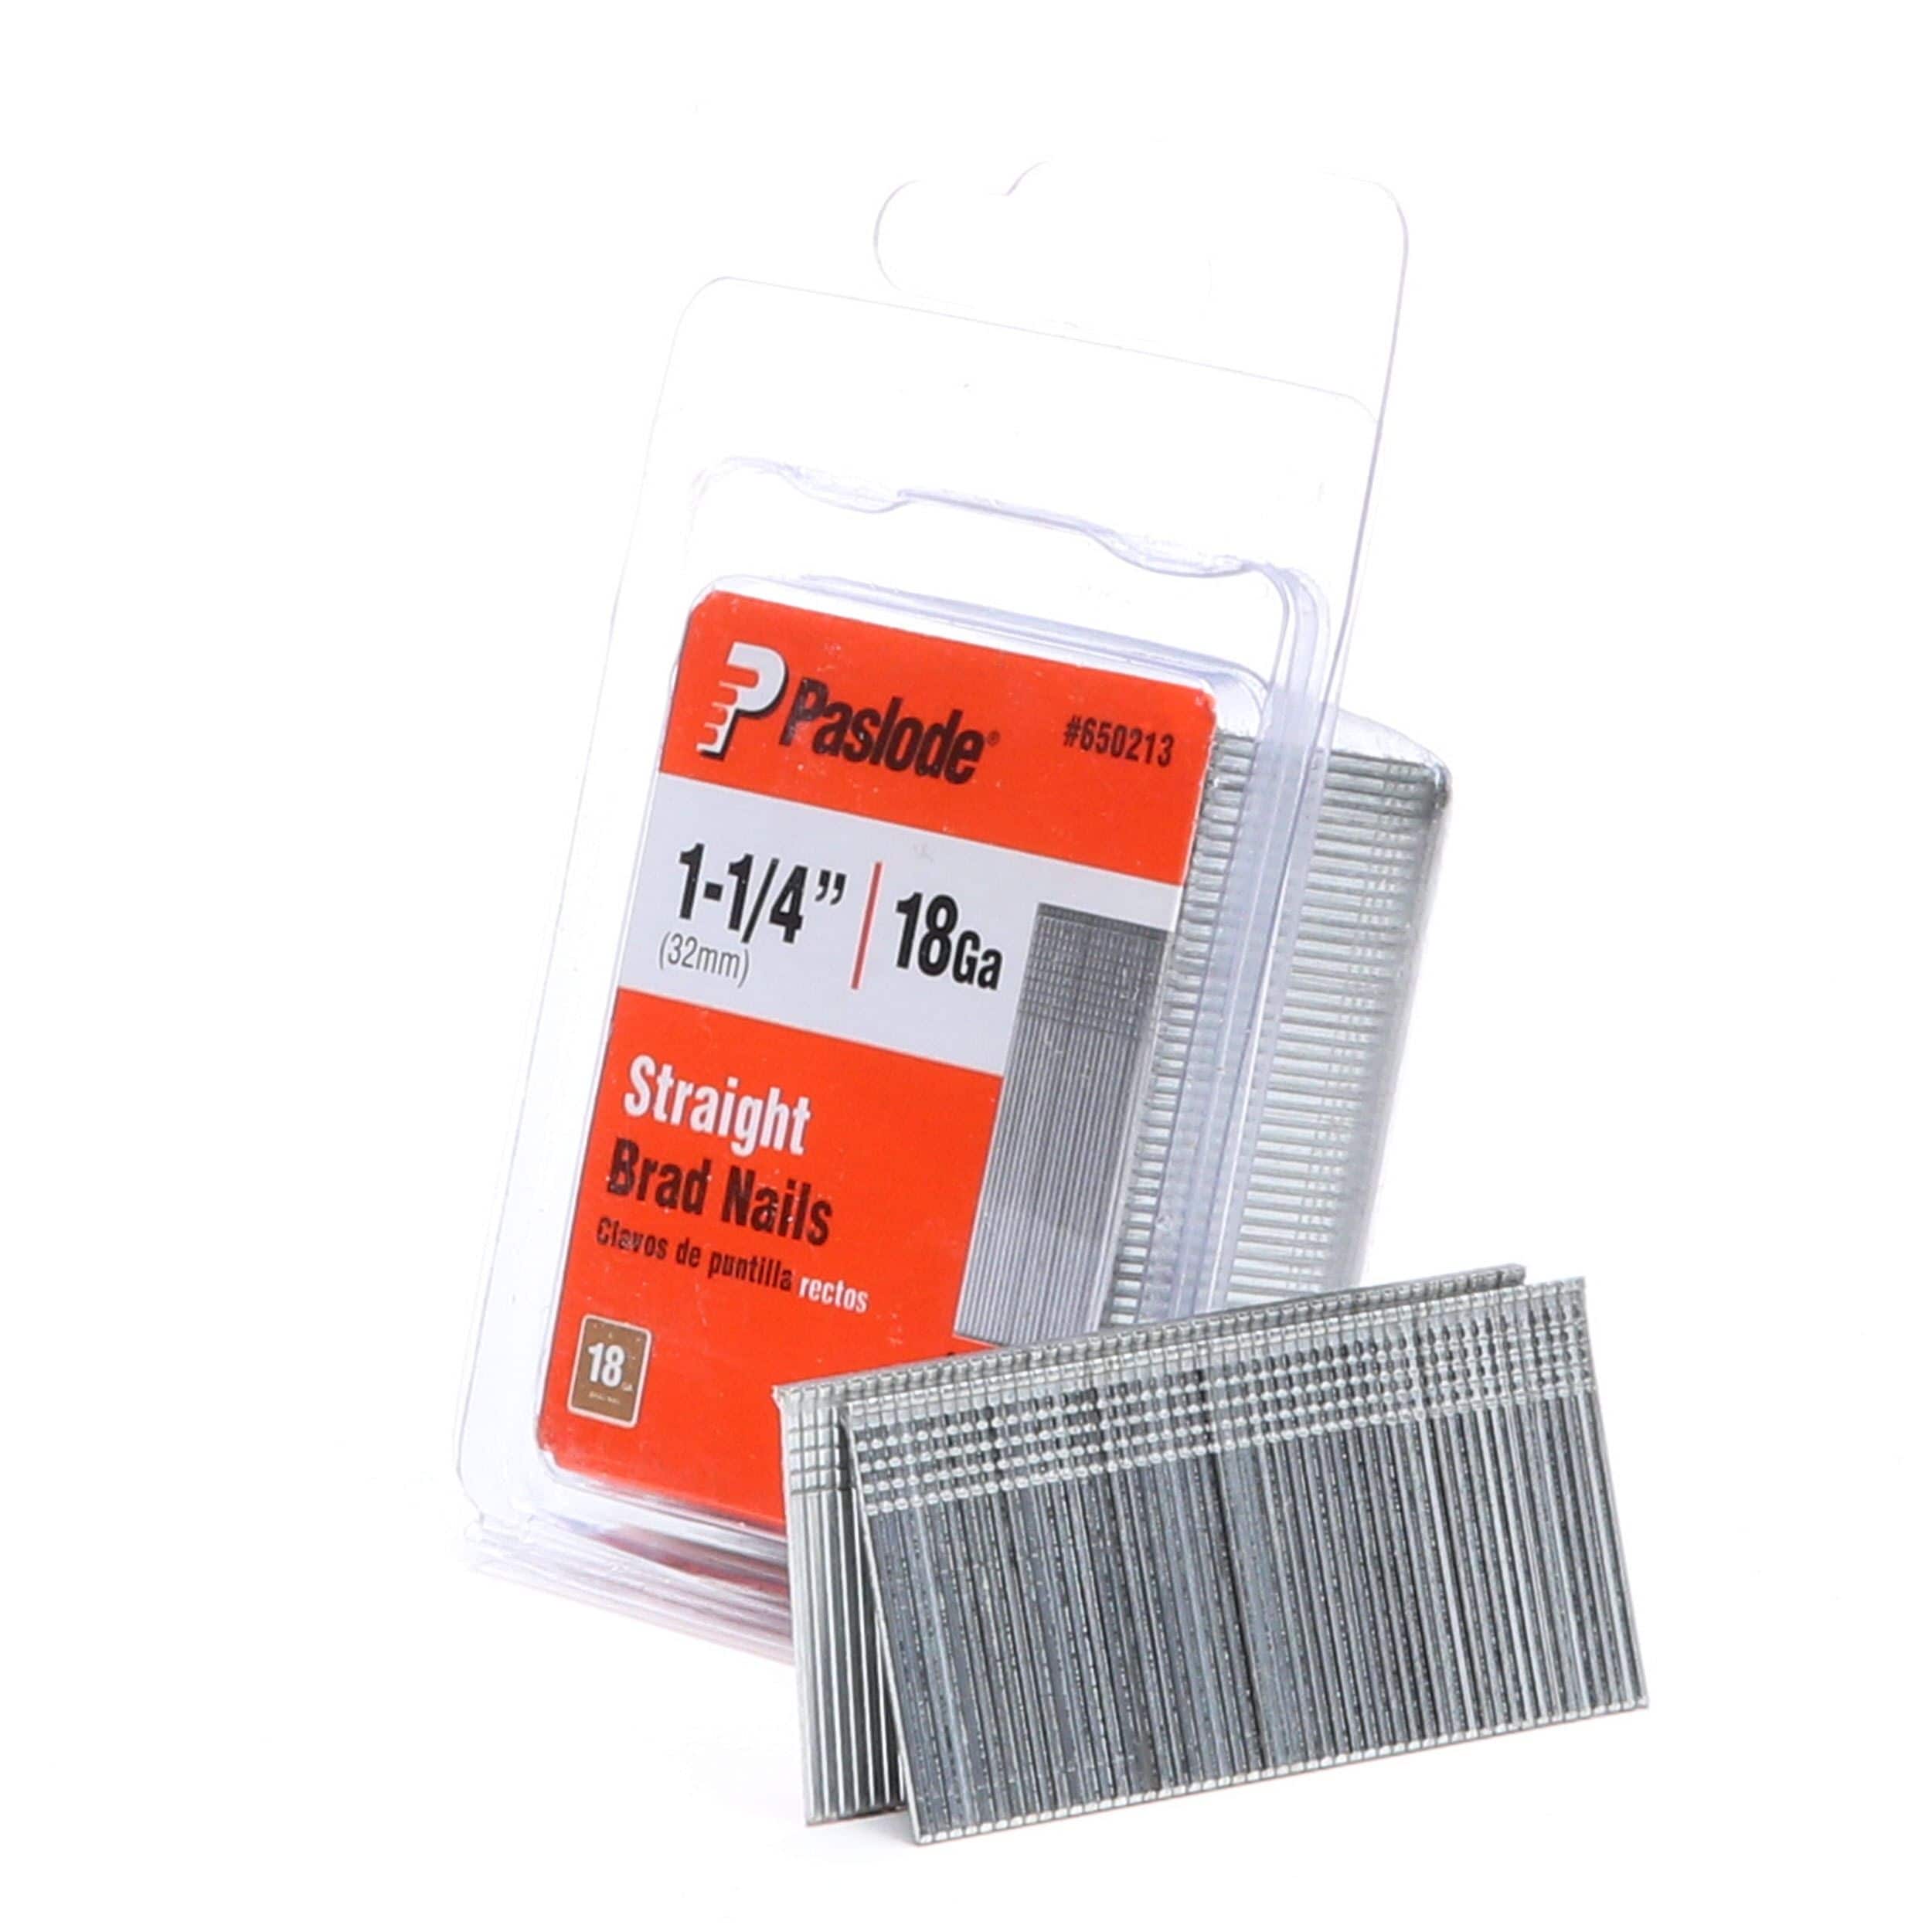 5000pcs Firmahold 18G Finishing Galvanised Brads Nails Fit Paslode 